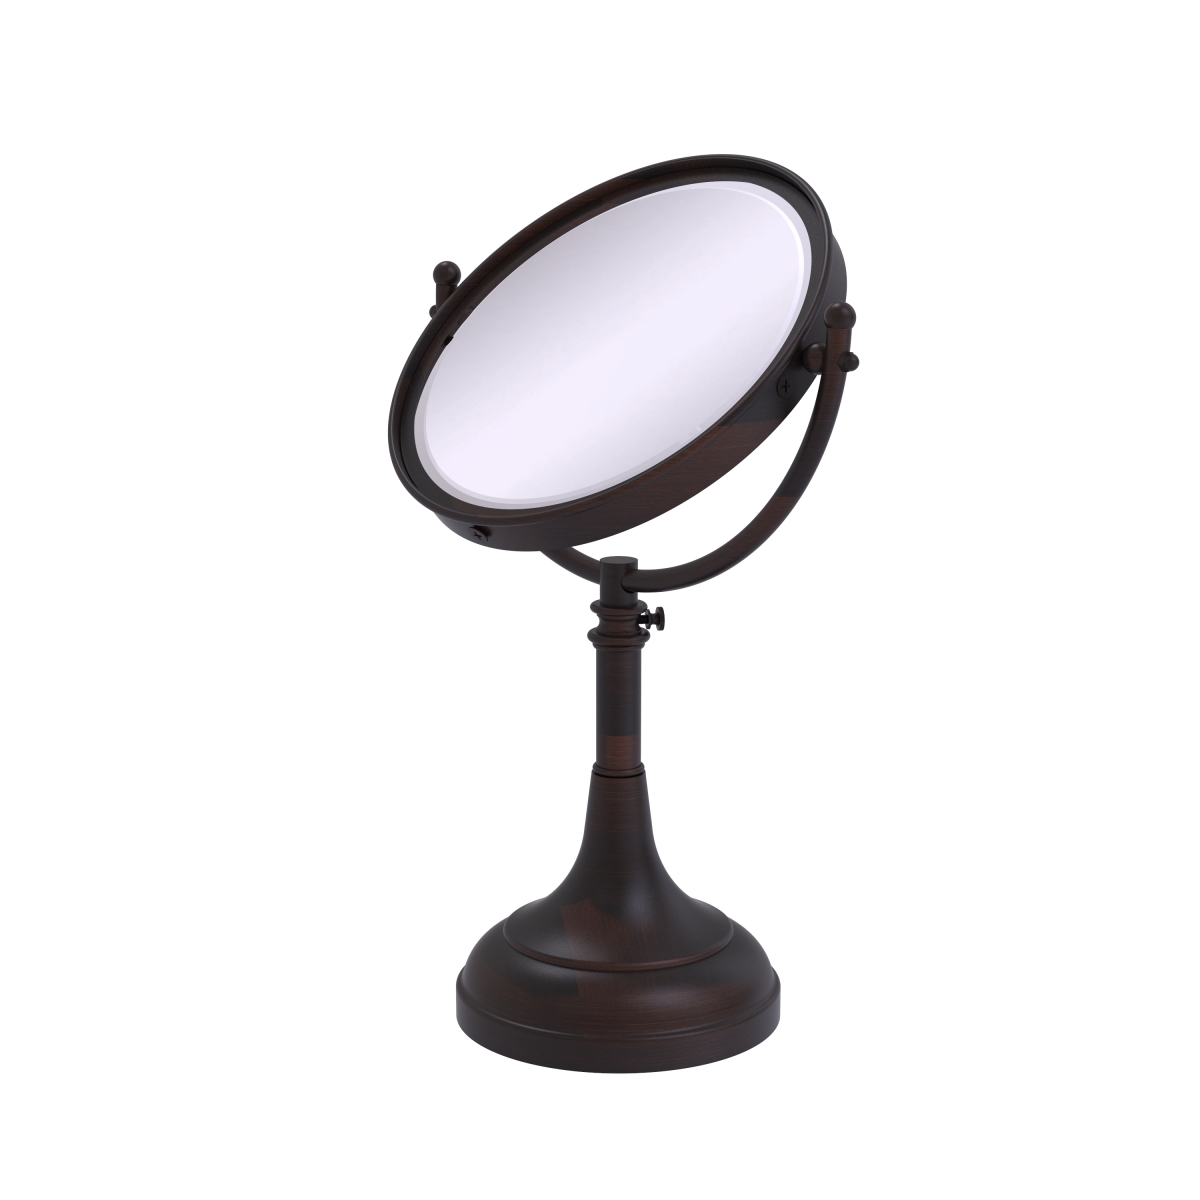 Picture of Allied Brass DM-1-5X-VB 8 in. Height Adjustable Vanity Top Make-Up Mirror 5X Magnification, Venetian Bronze